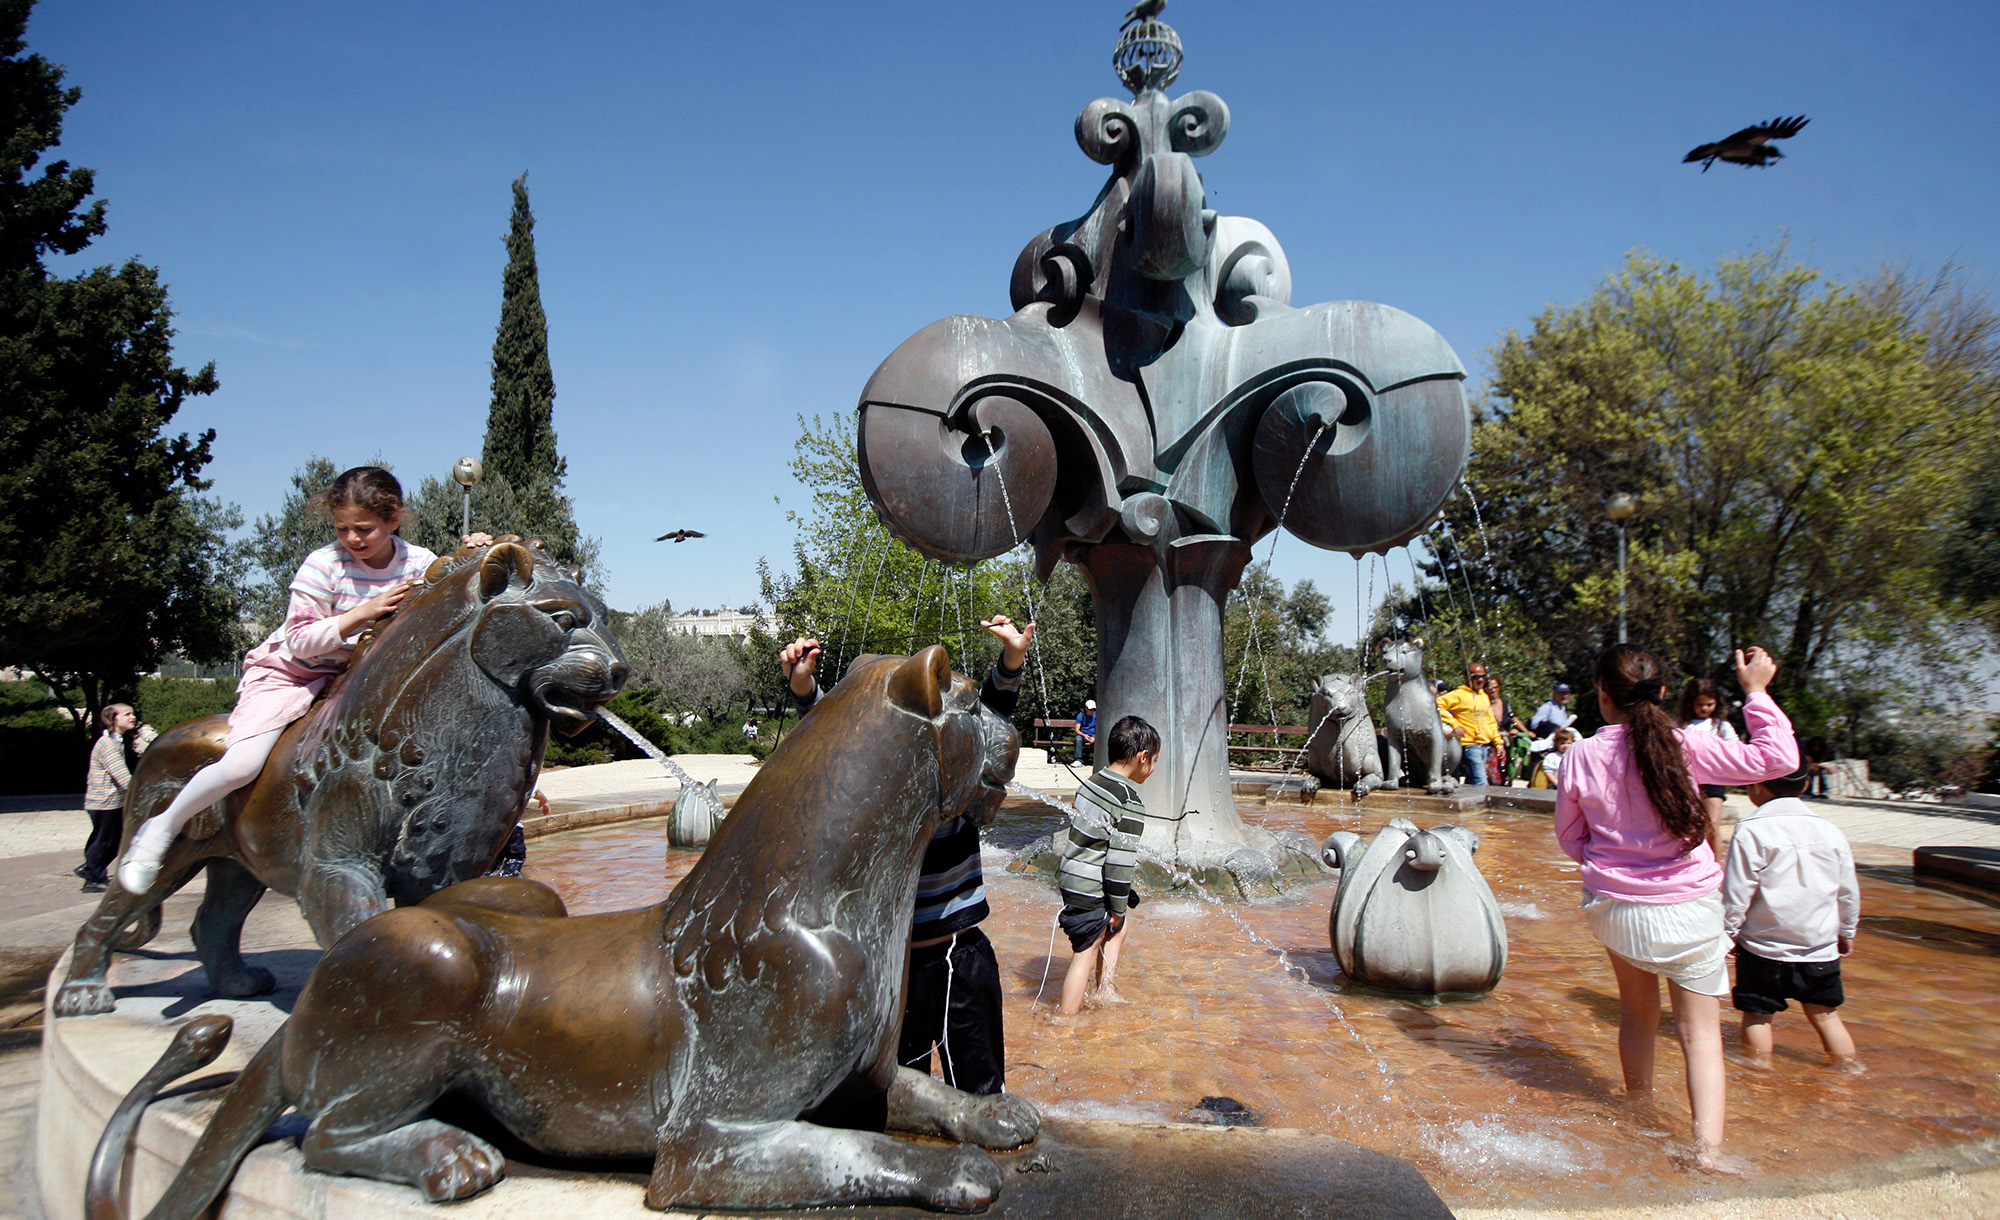 



Young Jewish children play in a fountain in Jerusalem during Passover on March 31, 2010. Miriam Alster/FLASH90.




